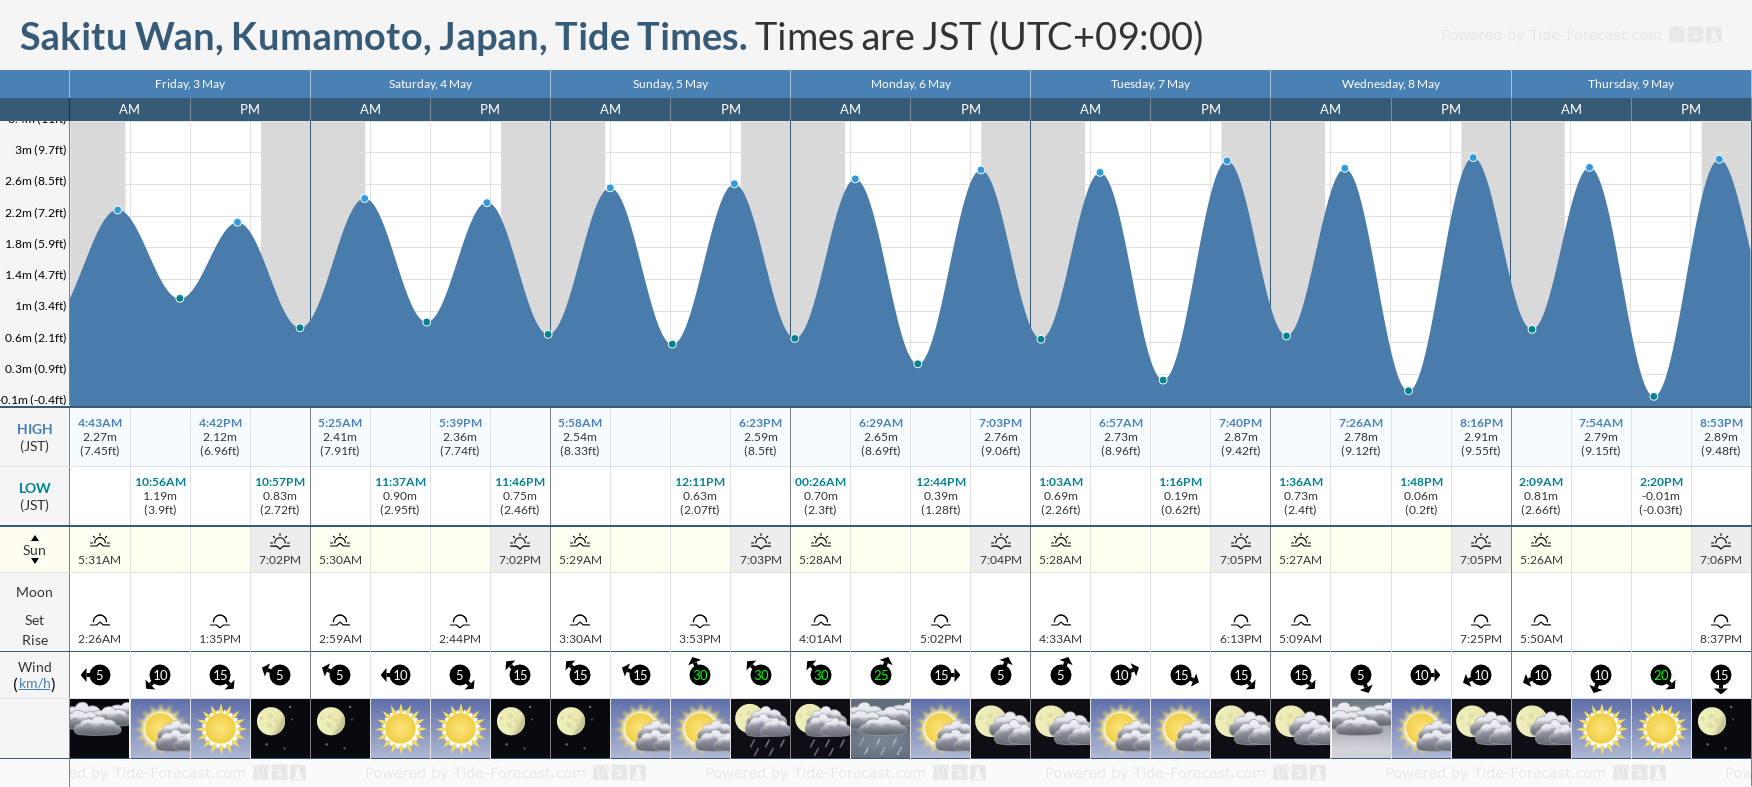 Sakitu Wan, Kumamoto, Japan Tide Chart including high and low tide times for the next 7 days